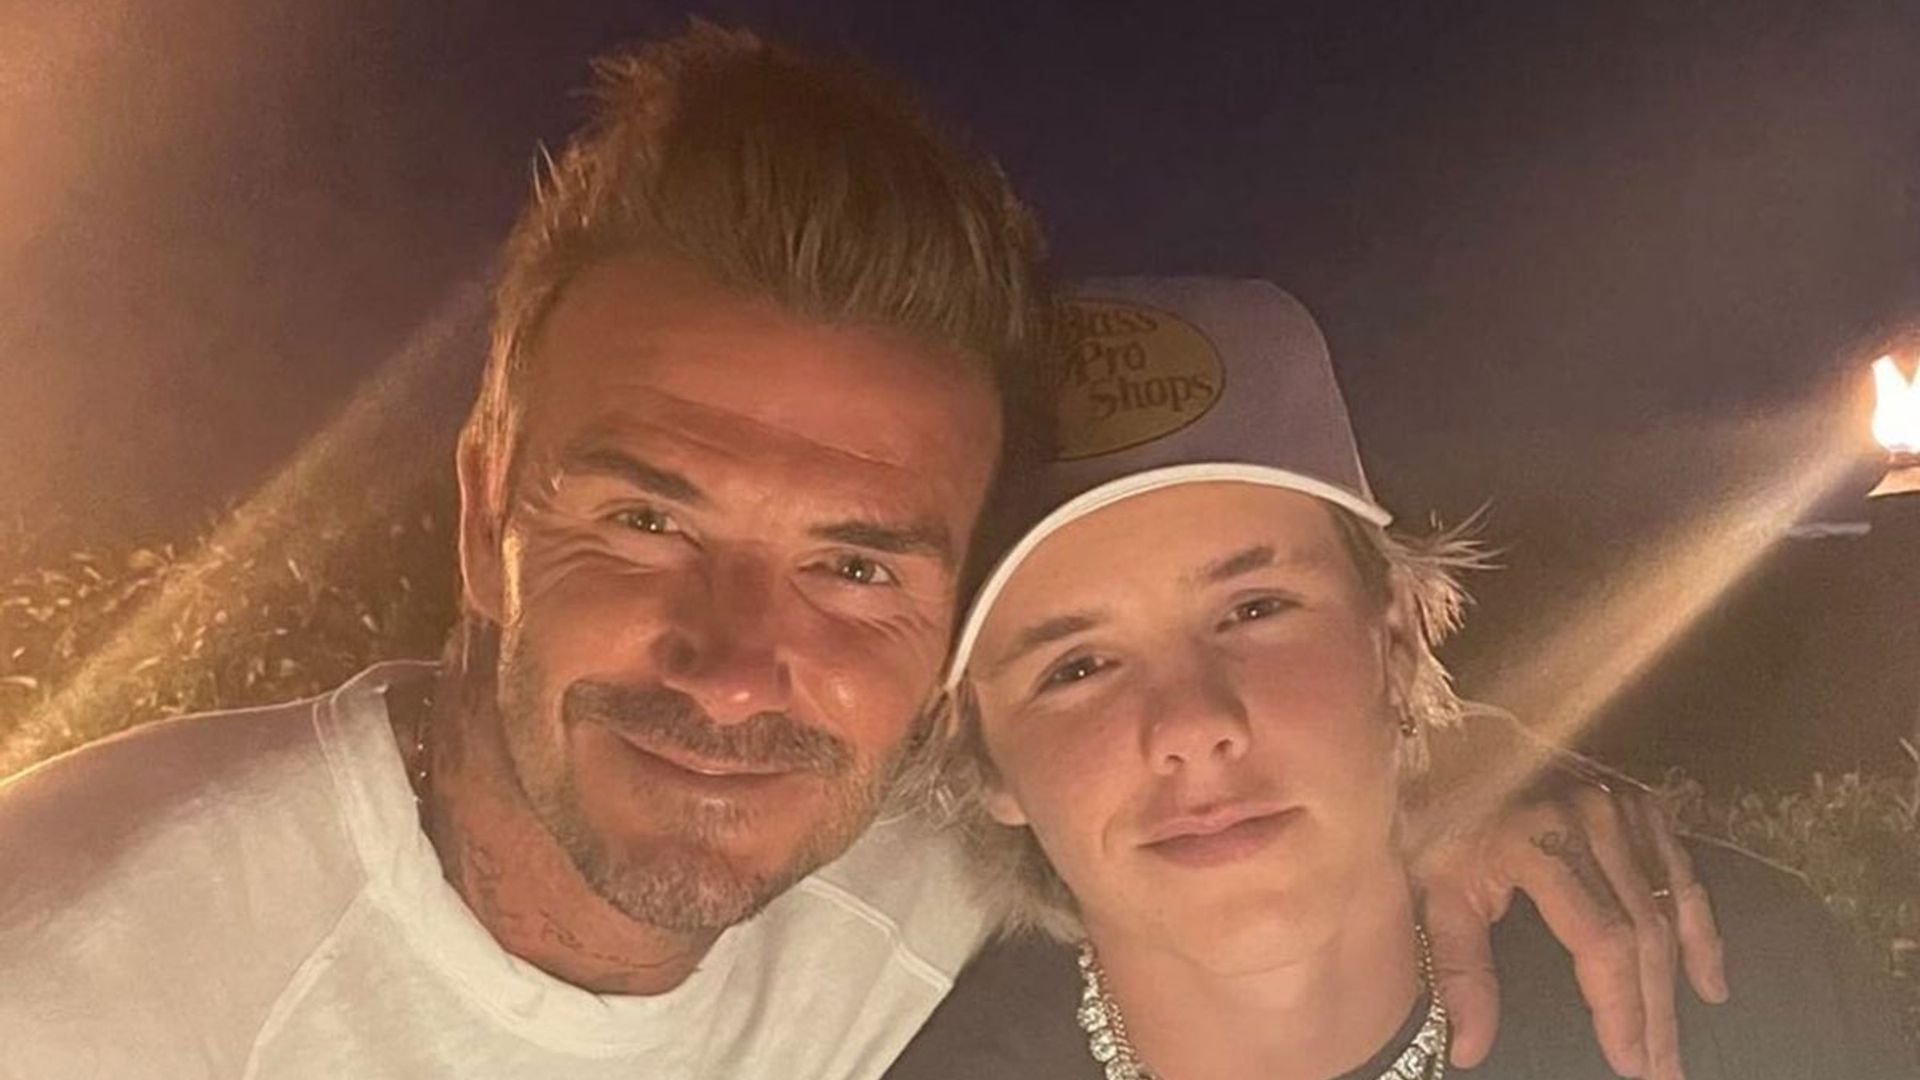 Cruz Beckham, 16, shows off FIRST tattoo and fans can't quite believe it